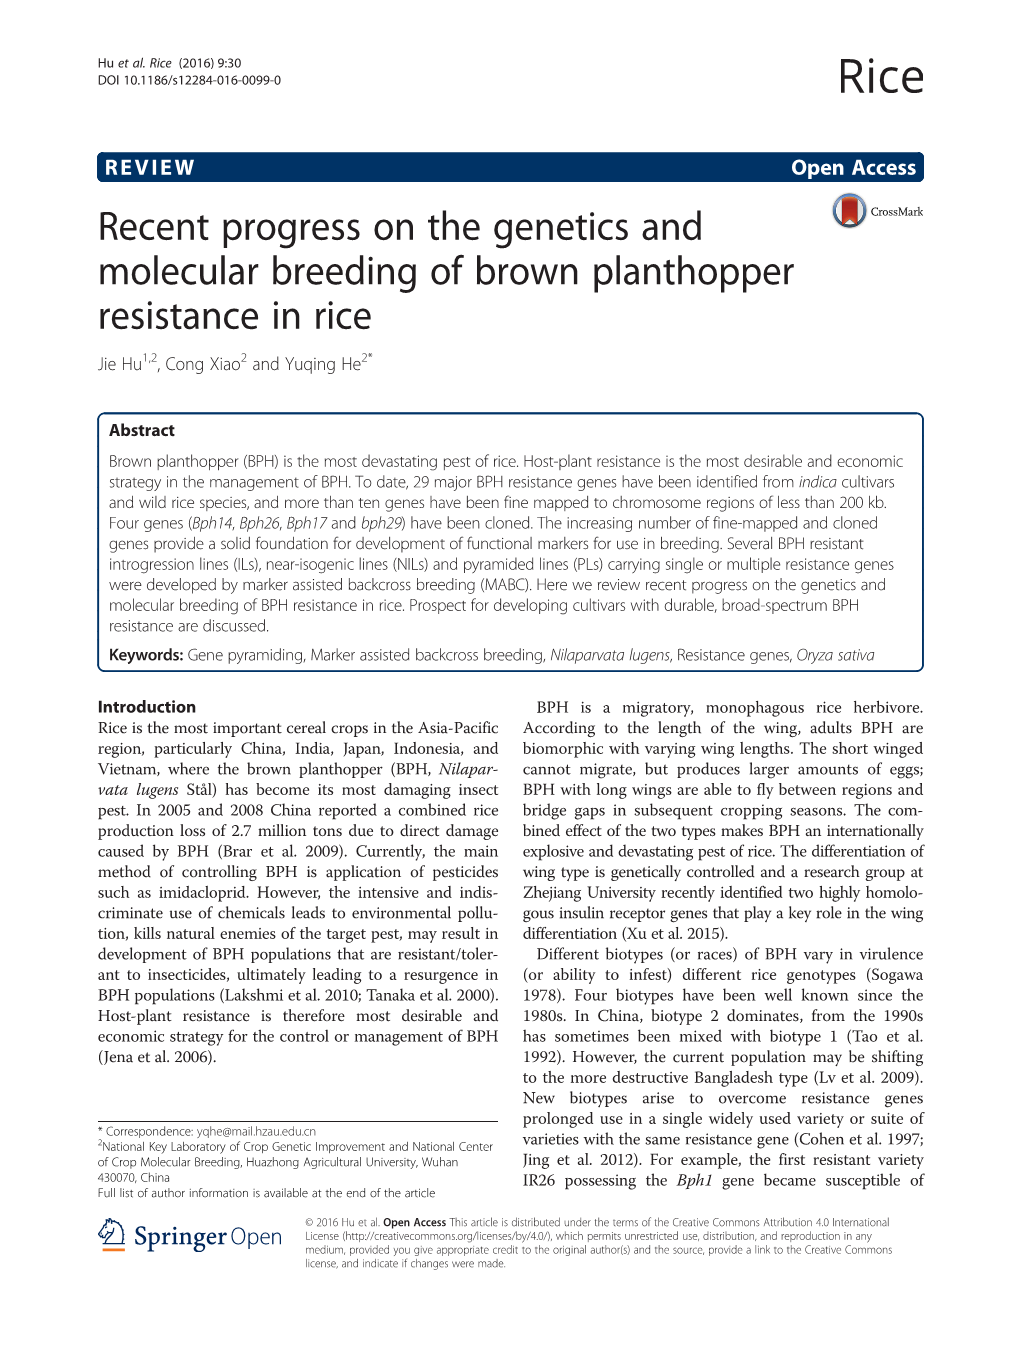 Recent Progress on the Genetics and Molecular Breeding of Brown Planthopper Resistance in Rice Jie Hu1,2, Cong Xiao2 and Yuqing He2*